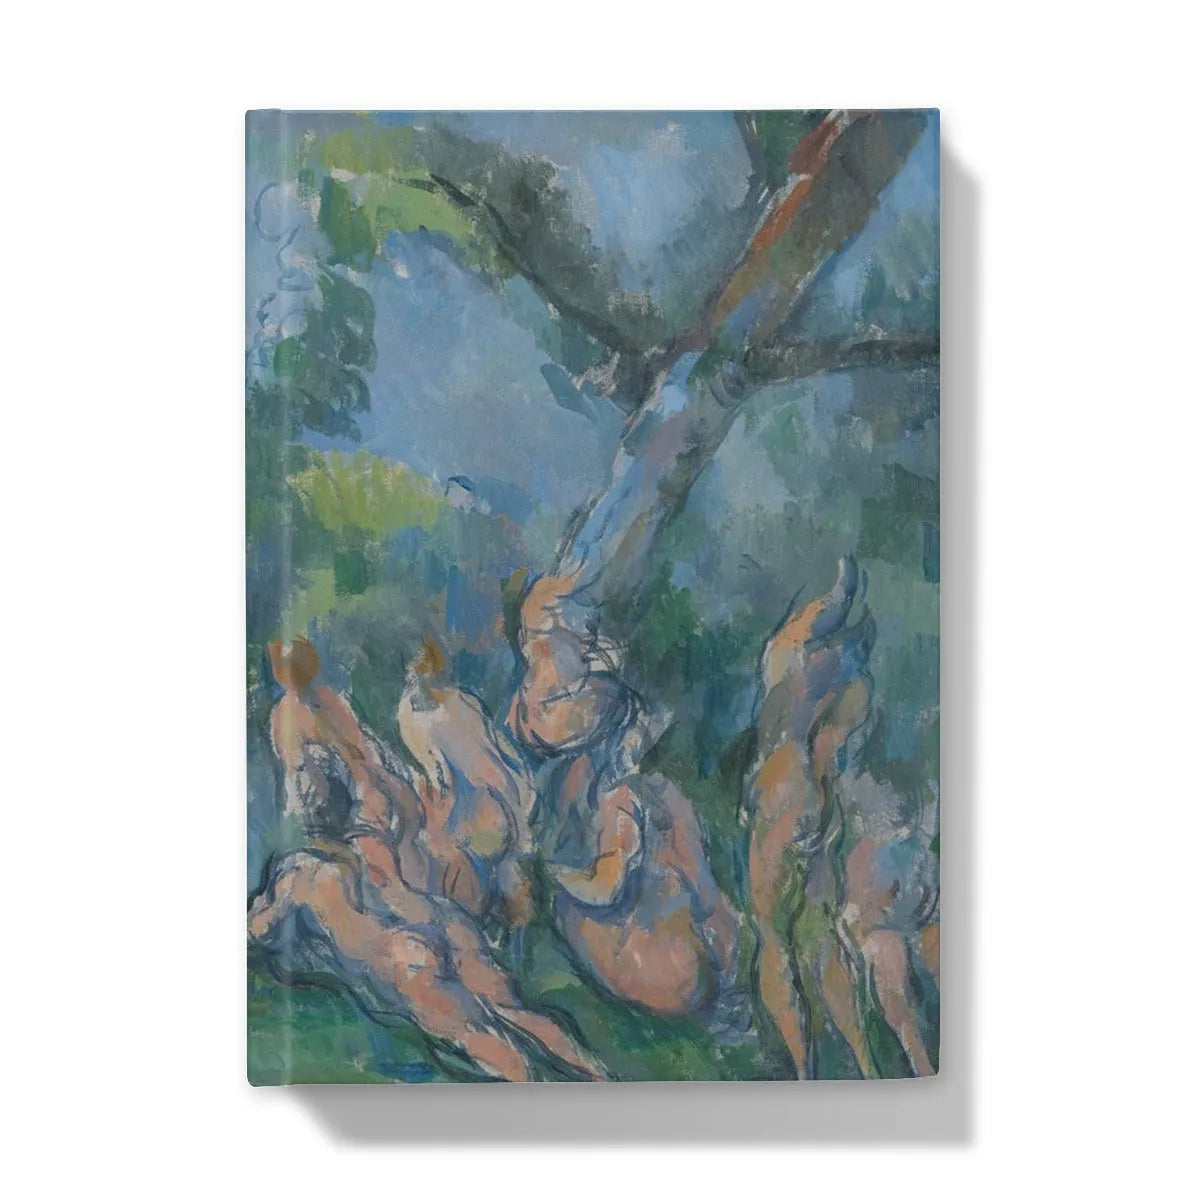 The Bathers By Paul Cezanne Hardback Journal - 5’x7’ / Lined - Notebooks & Notepads - Aesthetic Art